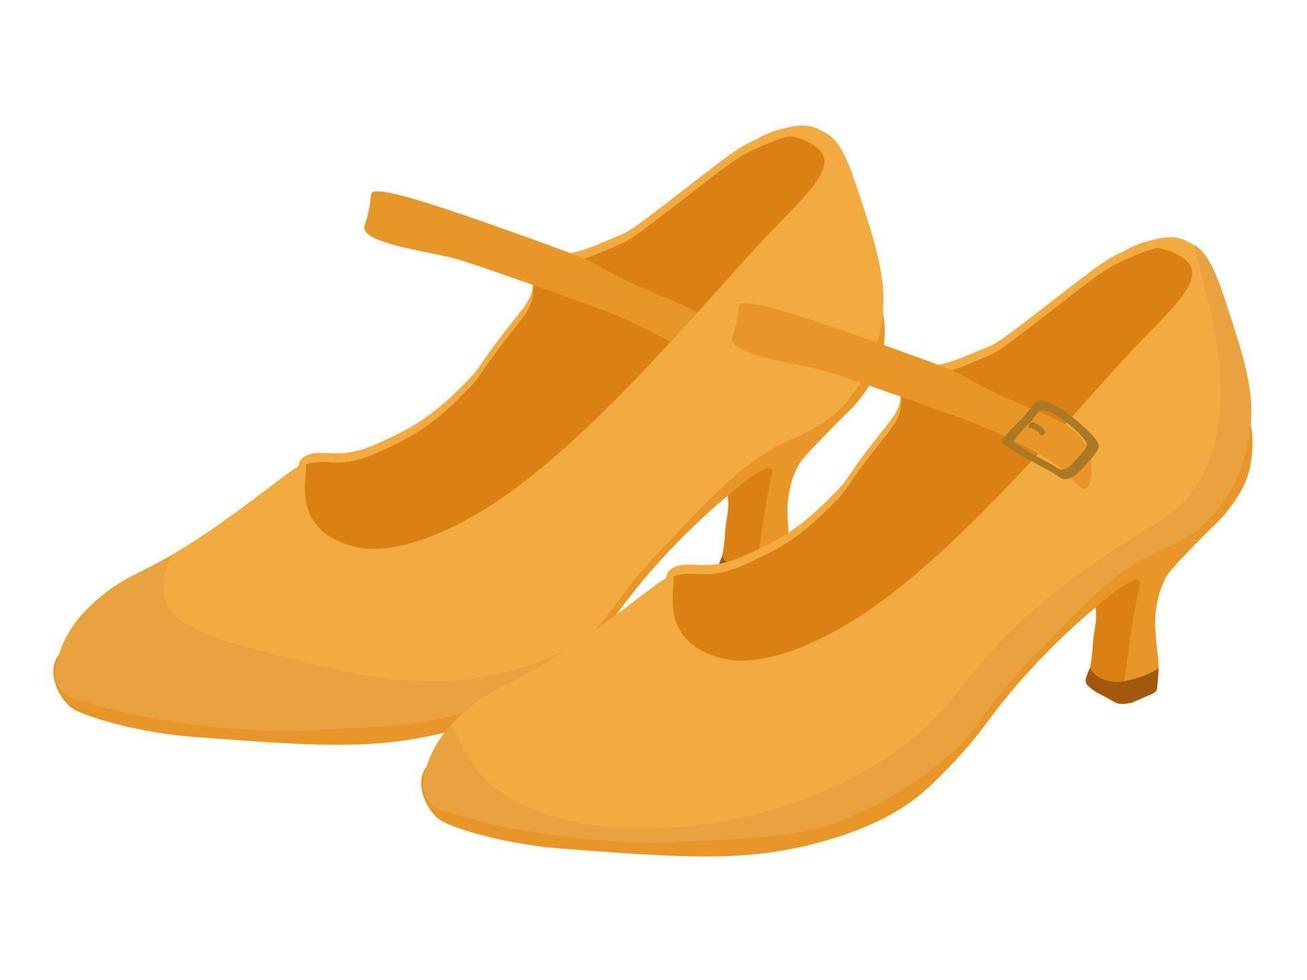 womens dance shoes in orange, a pair of dance shoes vector